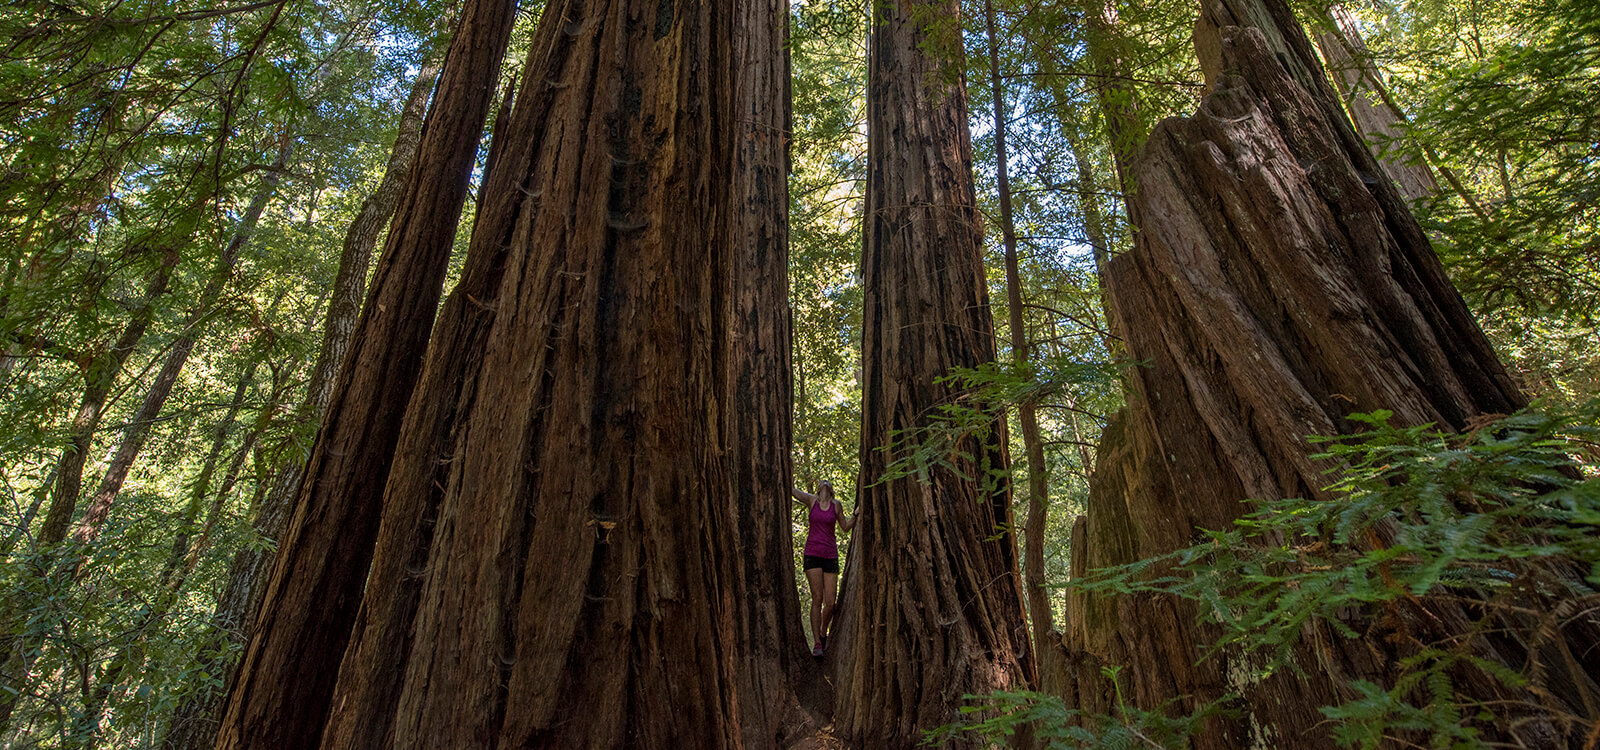 A girl looking up at the massive towering redwood trees at Big Basin State Park